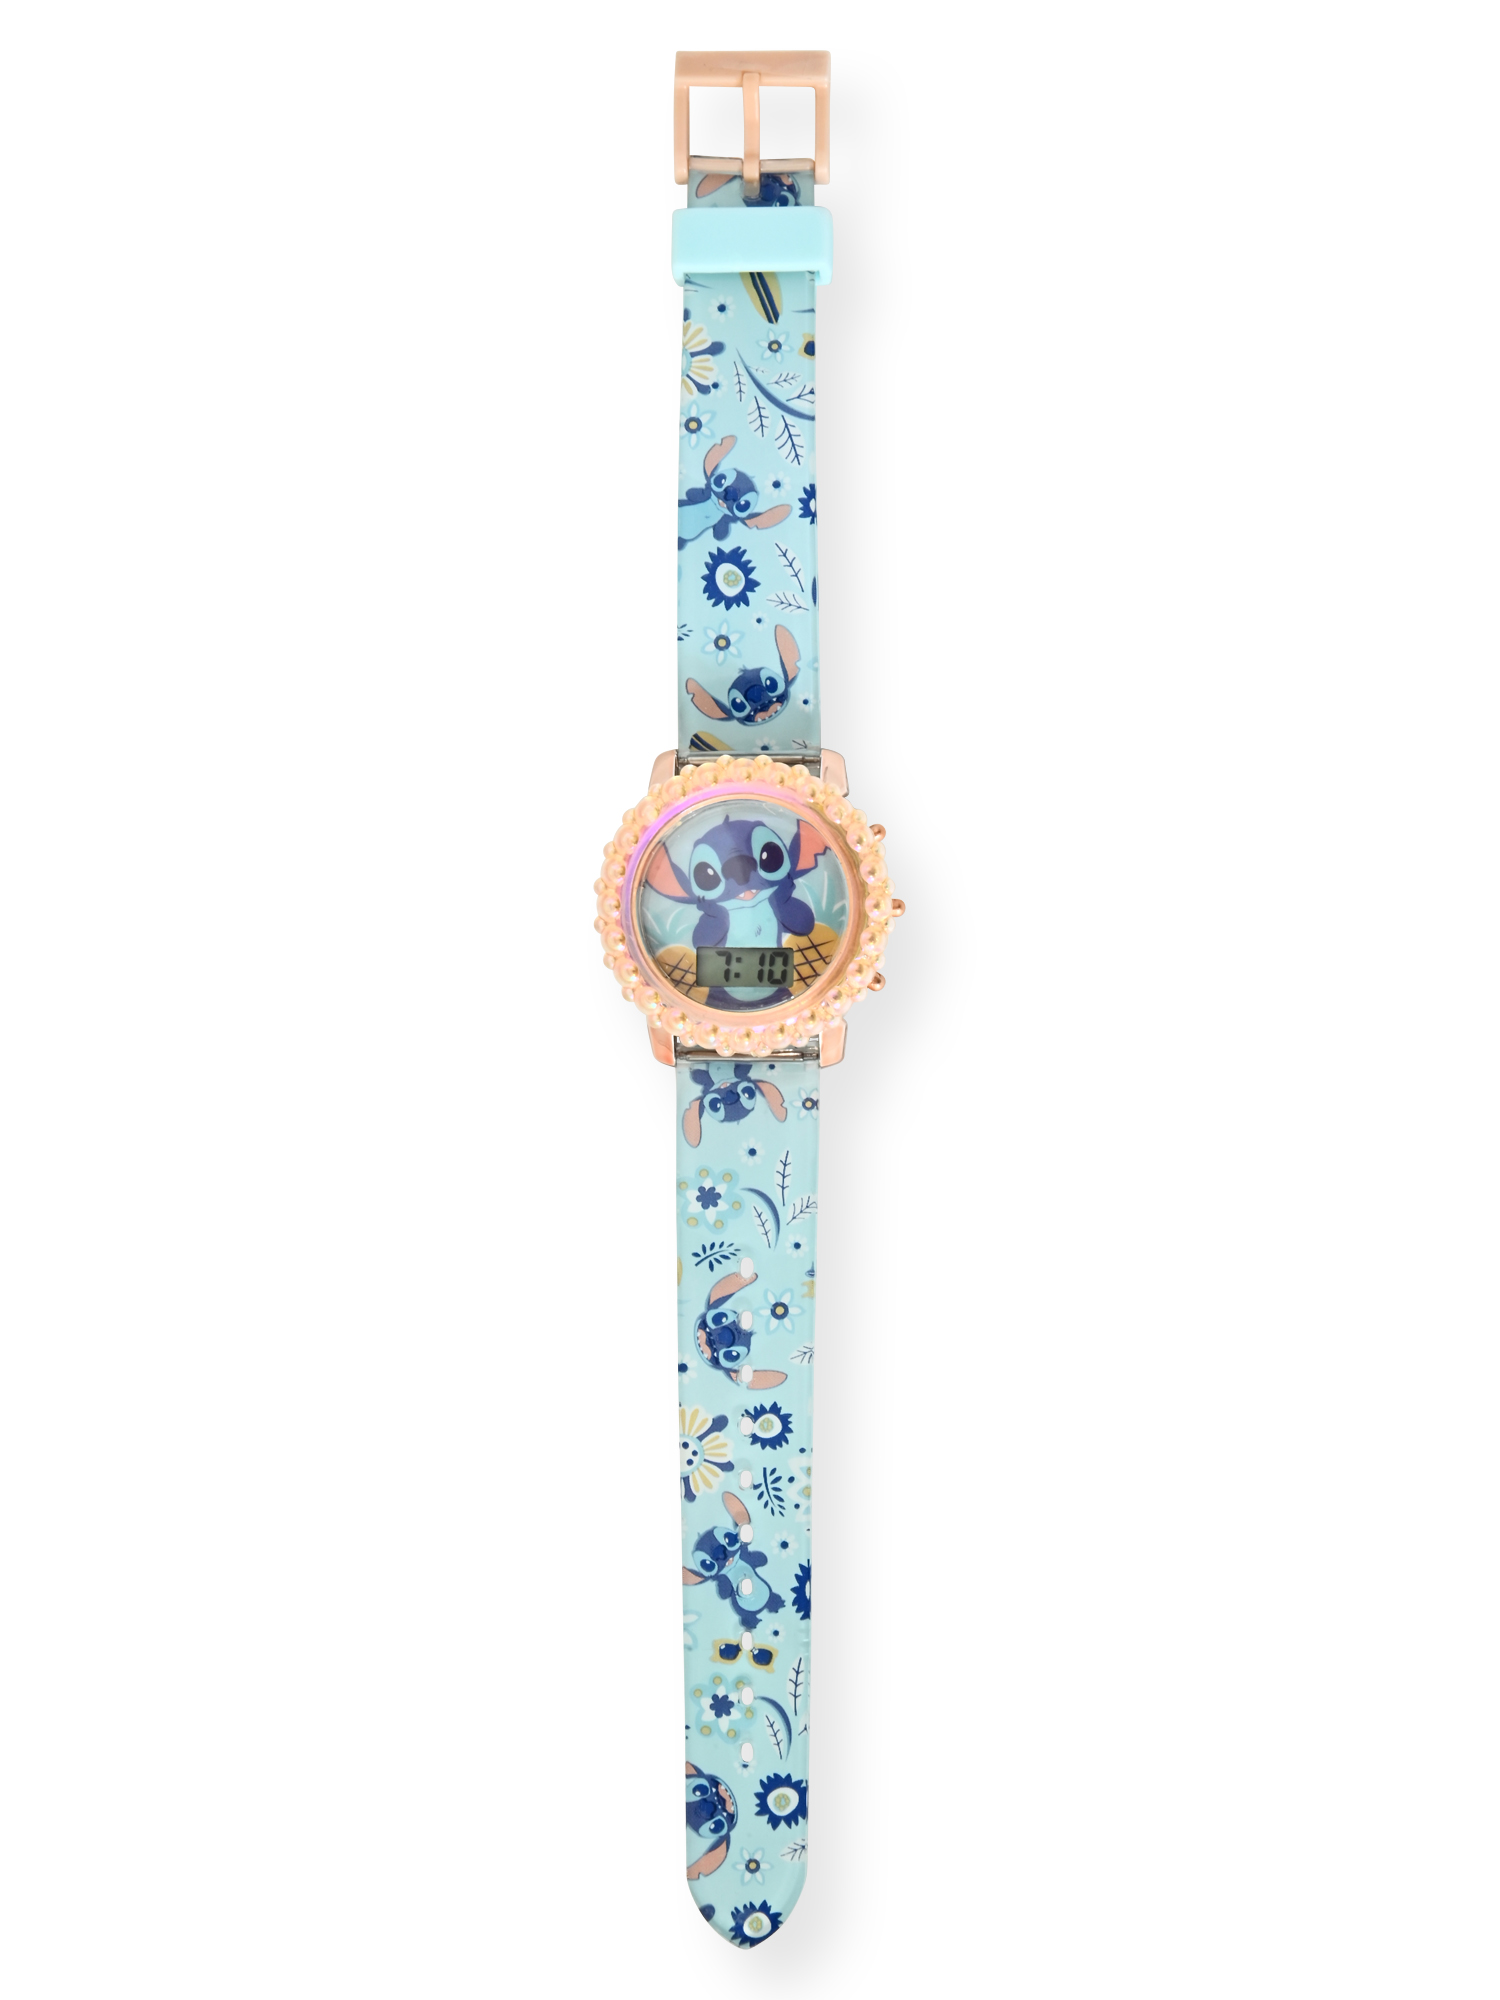 LAS4079WM Stitch Kids Molded Case Flashing Lights LCD Watch with Printed Strap - image 2 of 3